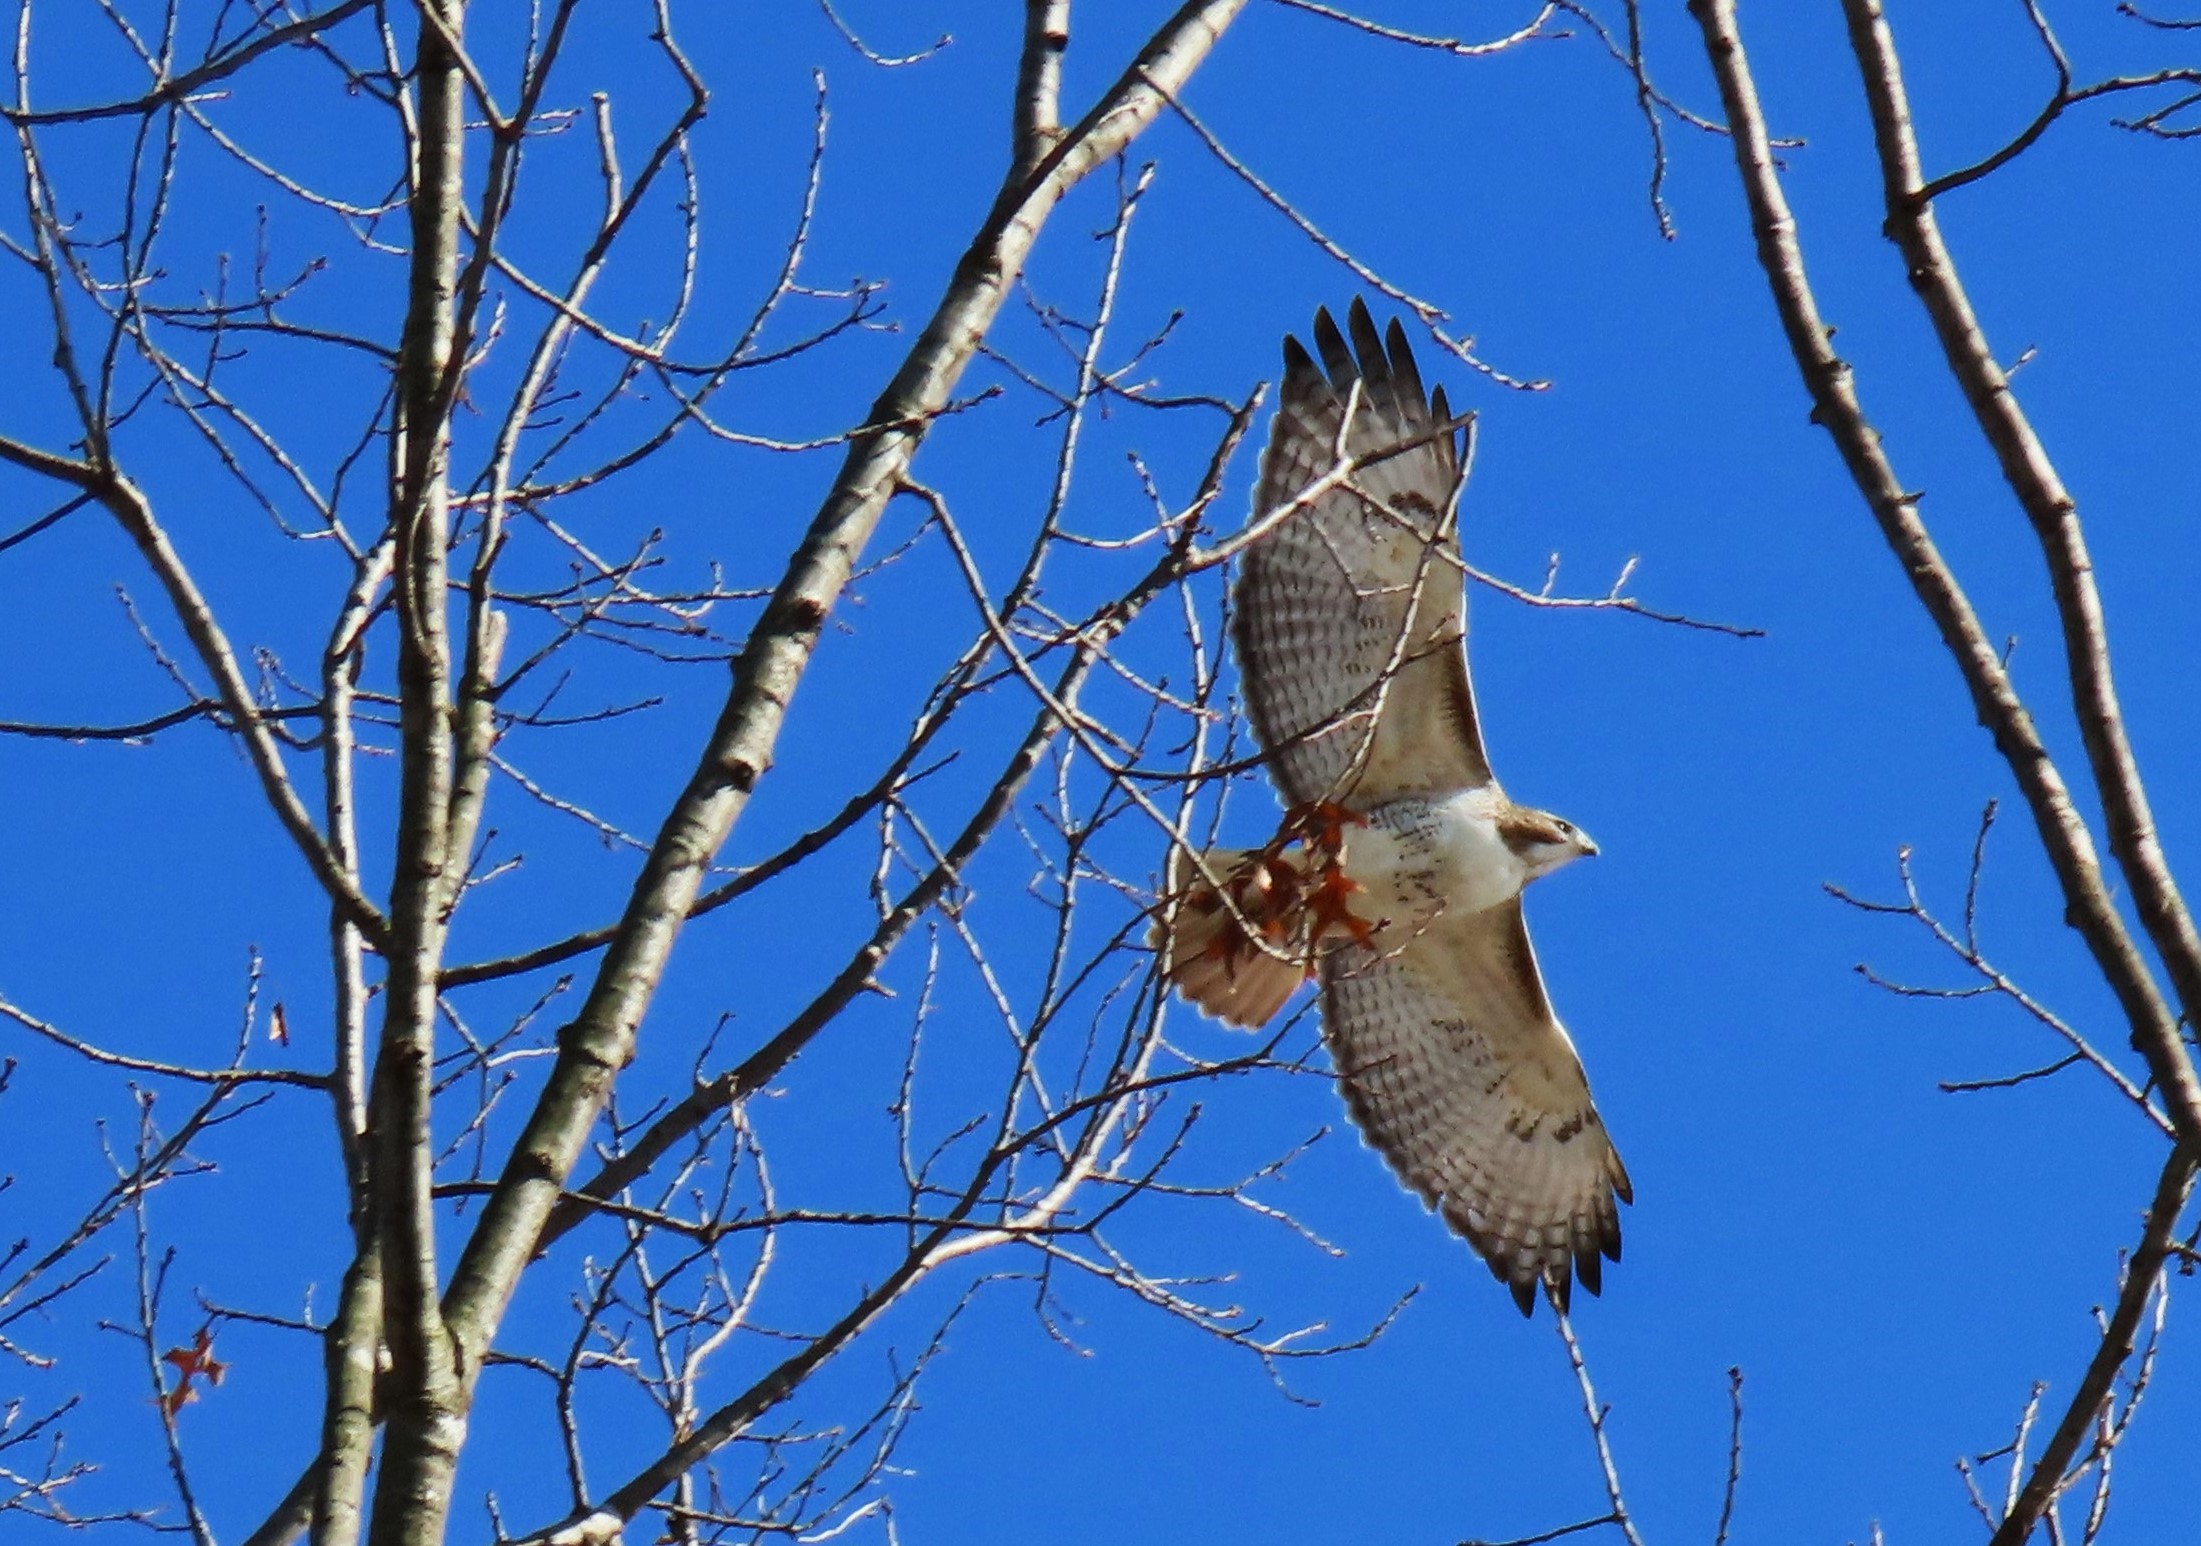 A Red-tailed Hawk soars above a tree, across a bright-blue sky